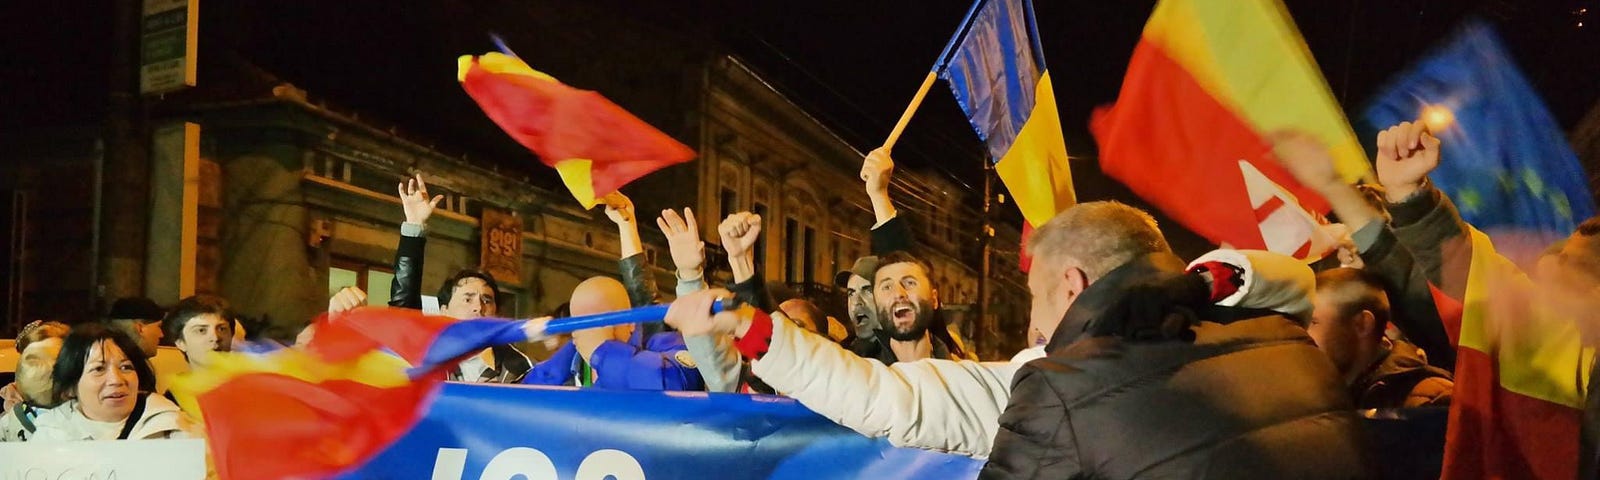 Enthusiastic protesters at night in Cluj-Napoca, Romania, waving Romanian flags and holding a banner with the message “JOS ponta JOS comunismul” (DOWN with Ponta DOWN with communism). The atmosphere is vibrant with citizens actively participating in the democratic process, calling for political change.